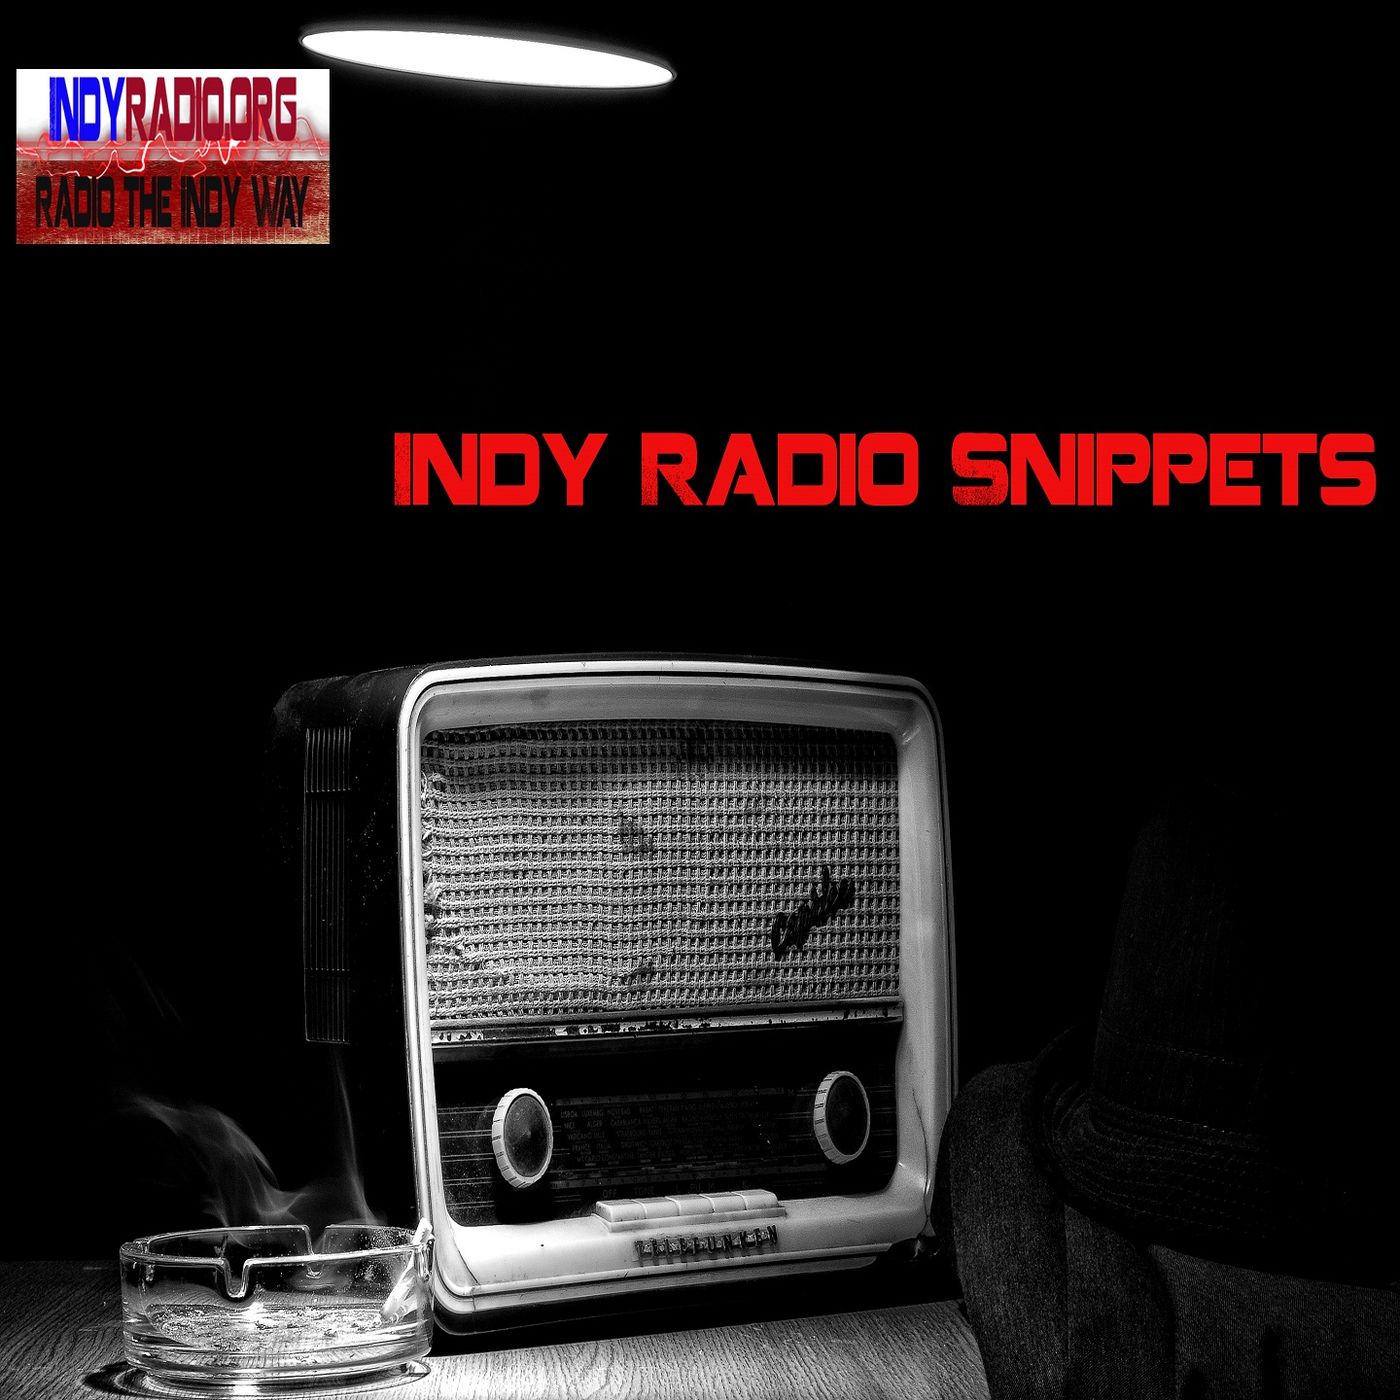 Indy Radio Snippets